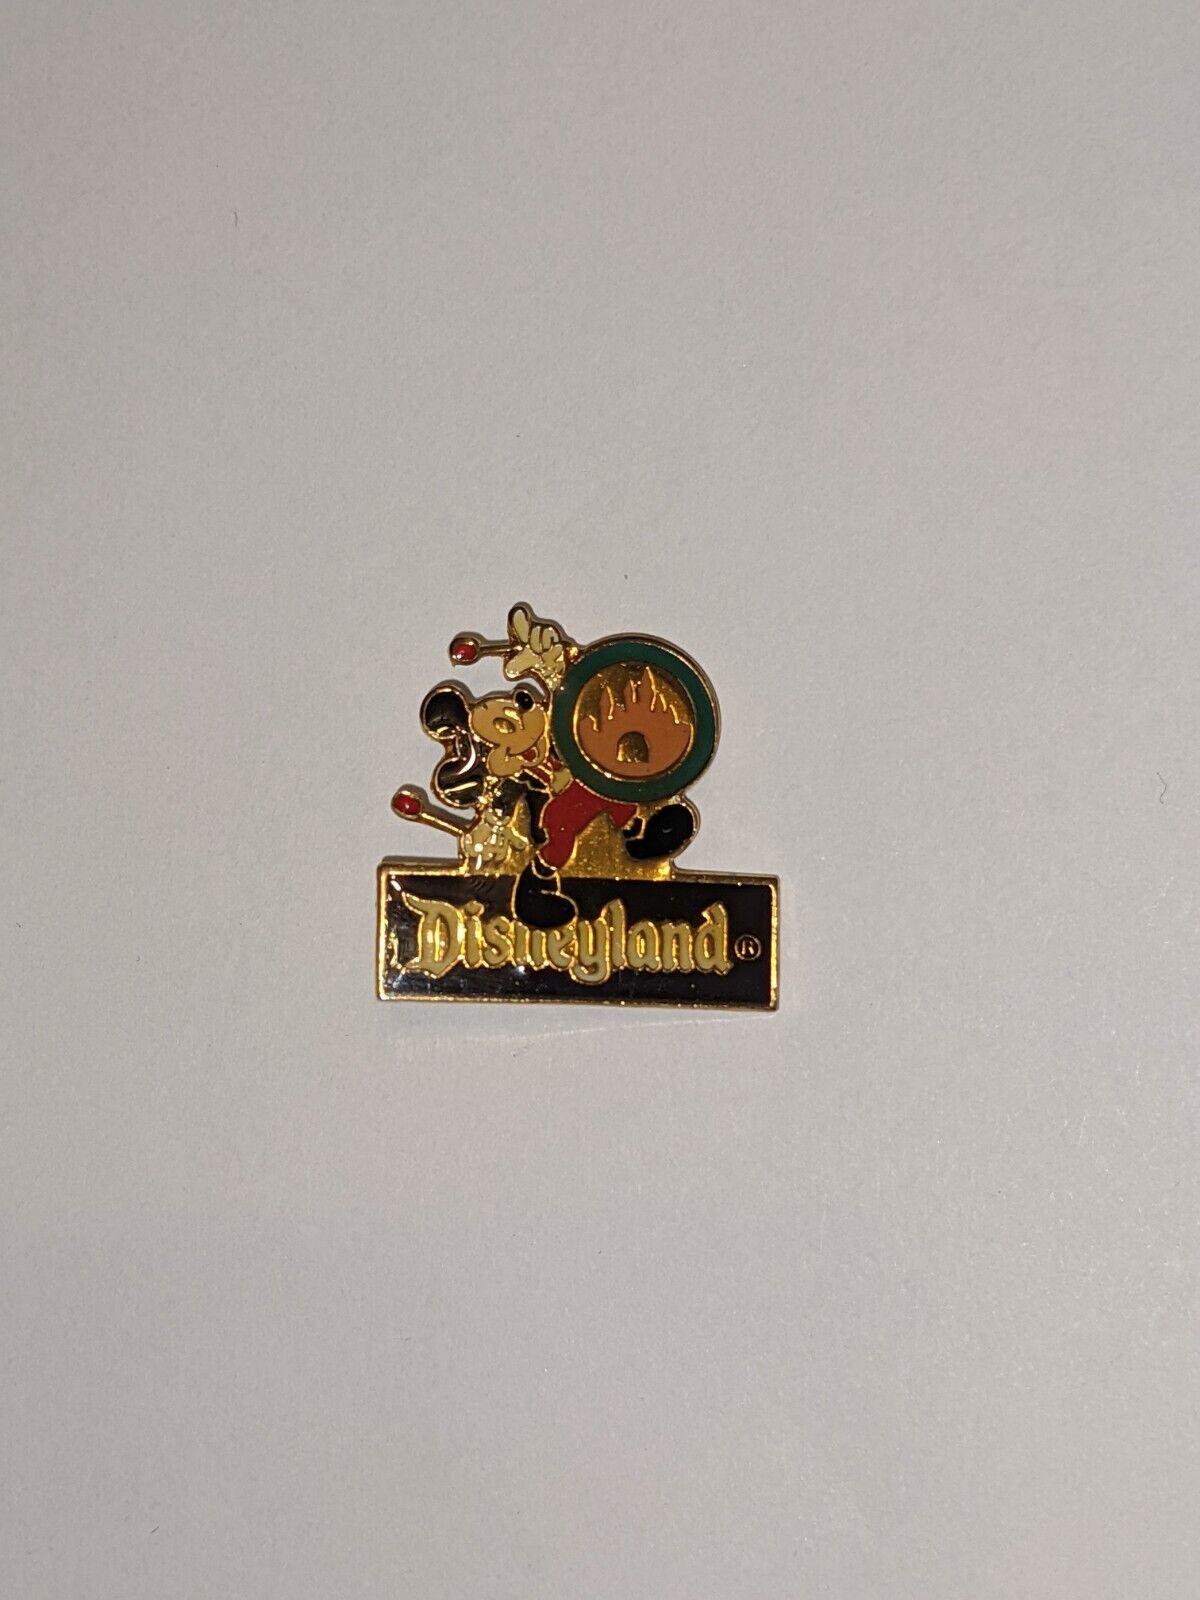 Vintage Disneyland Pin 1985 Mickey Mouse with drum